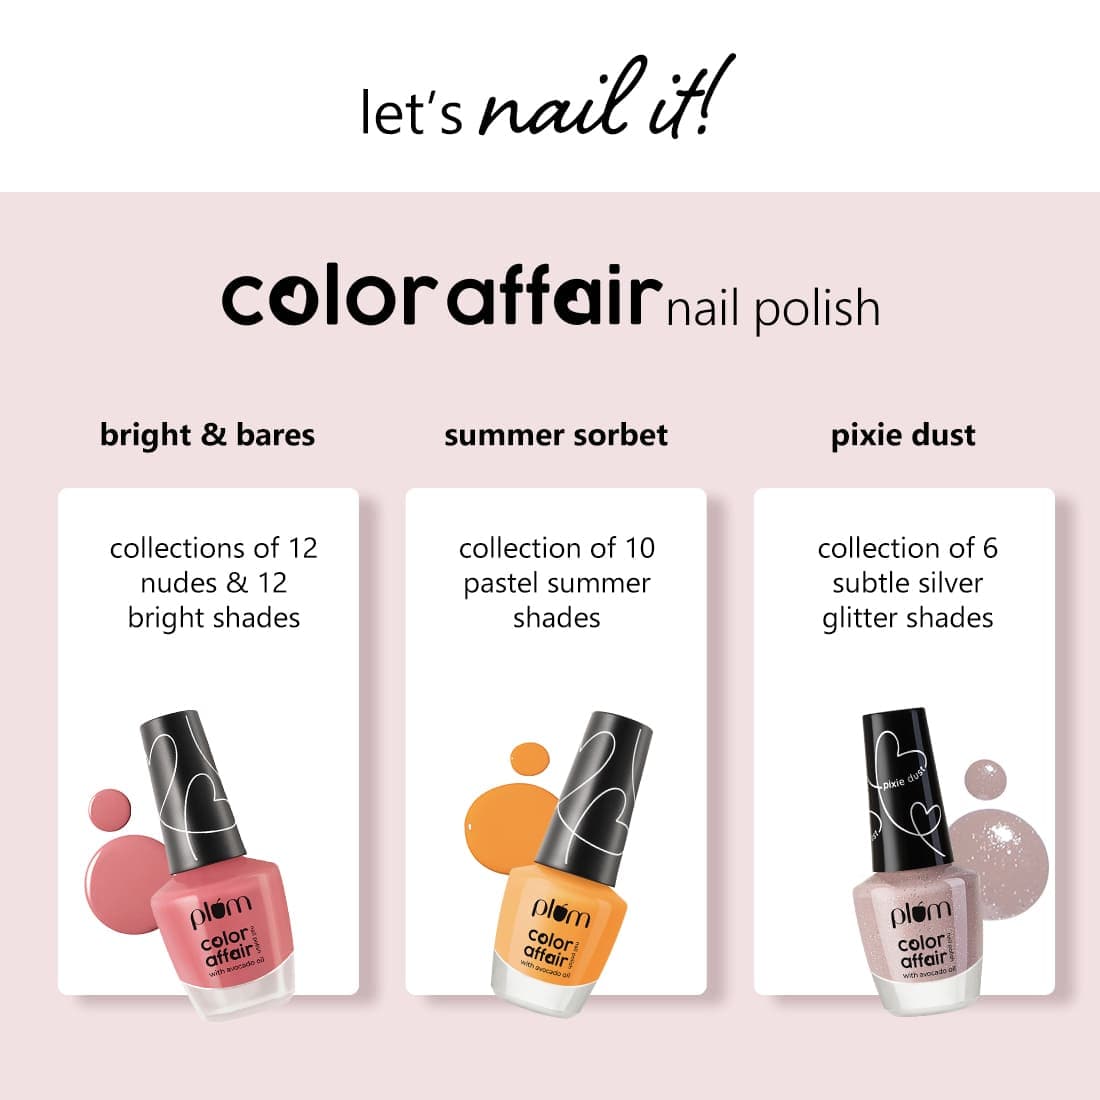 10 Hottest Nail Polish Shades To Wear This Summer - The Summer Study